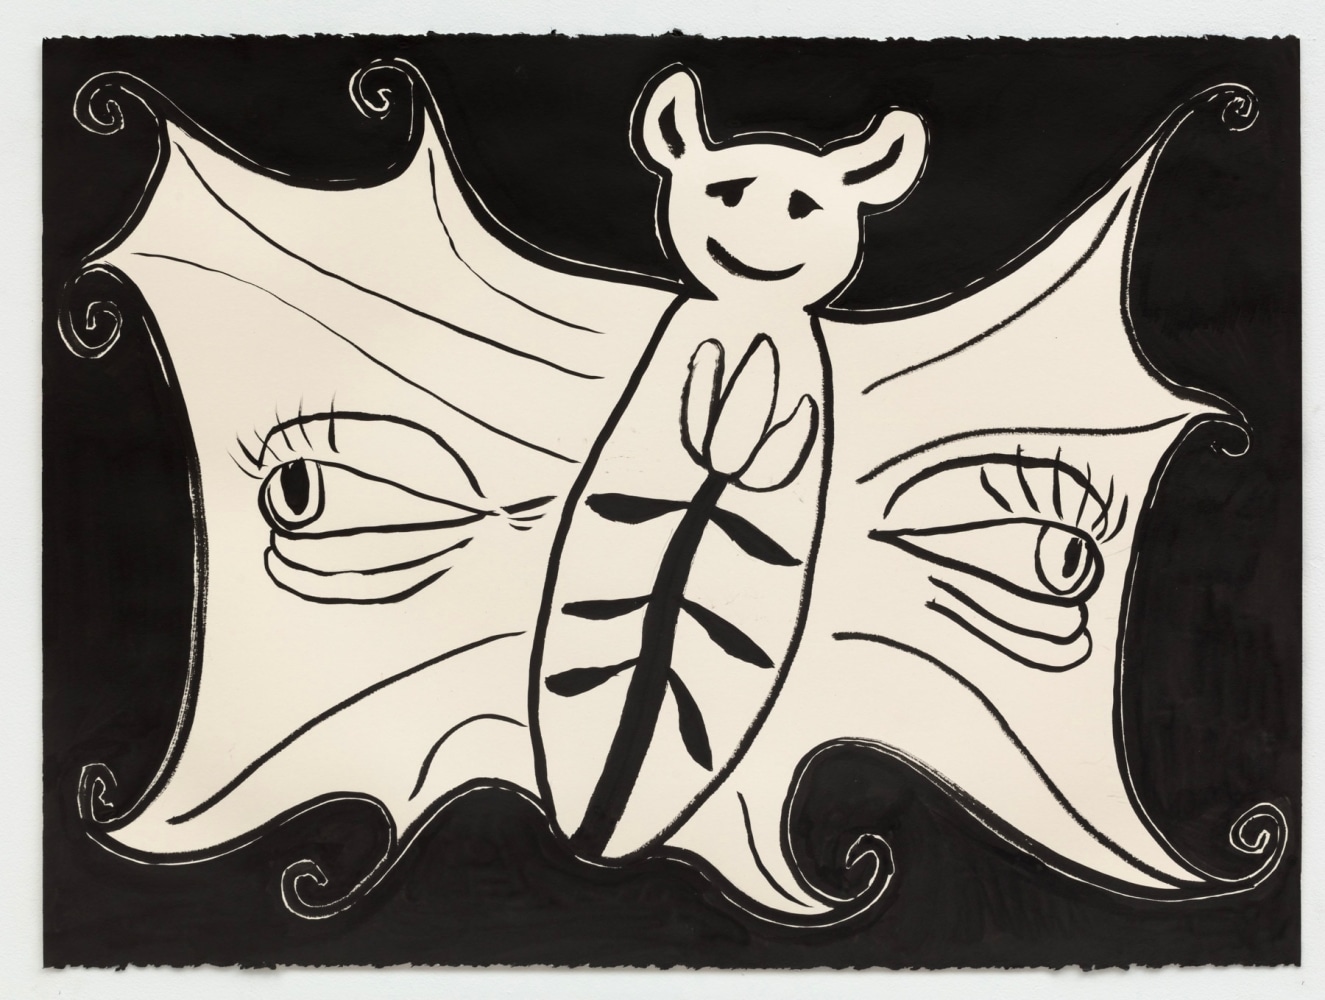 &amp;nbsp;

An eye-winged flower-chested bat at night, 2022

Sumi ink on Stonehenge cream hot press paper

22h x 30w in
55.88h x 76.20w cm

&amp;nbsp;